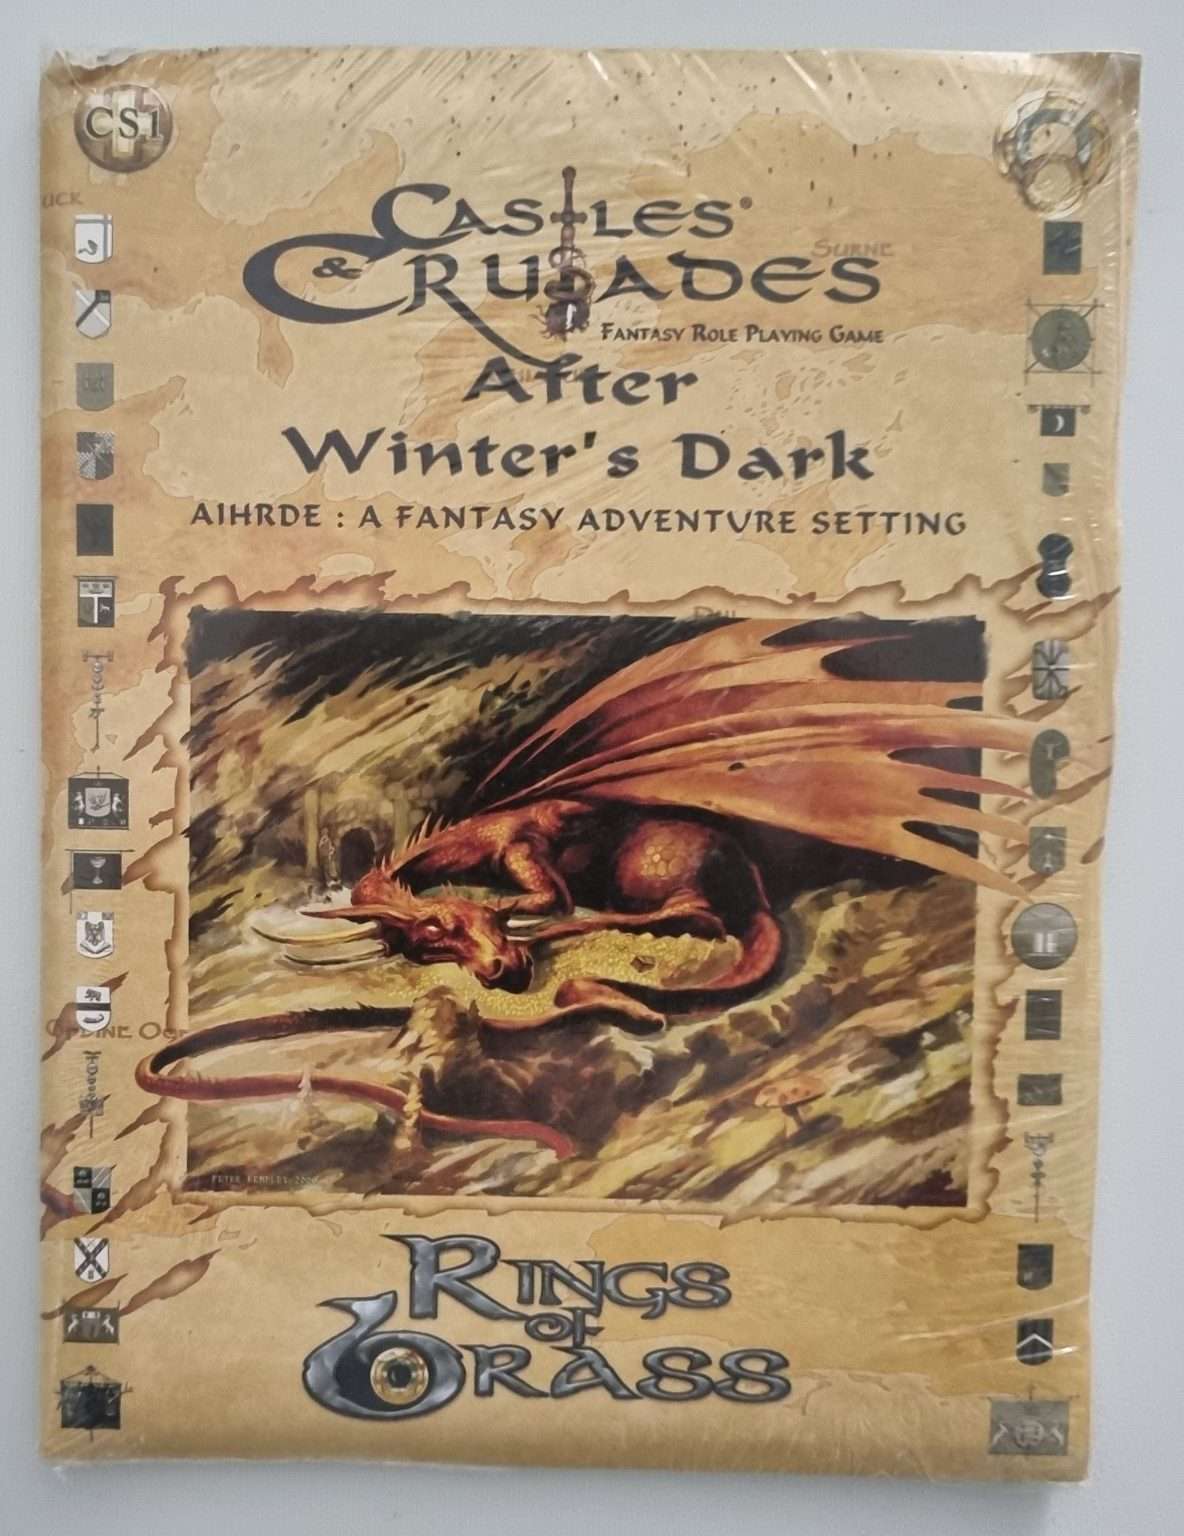 Castles and Crusades - After Winter's Dark - Aihrde Setting (Sealed)